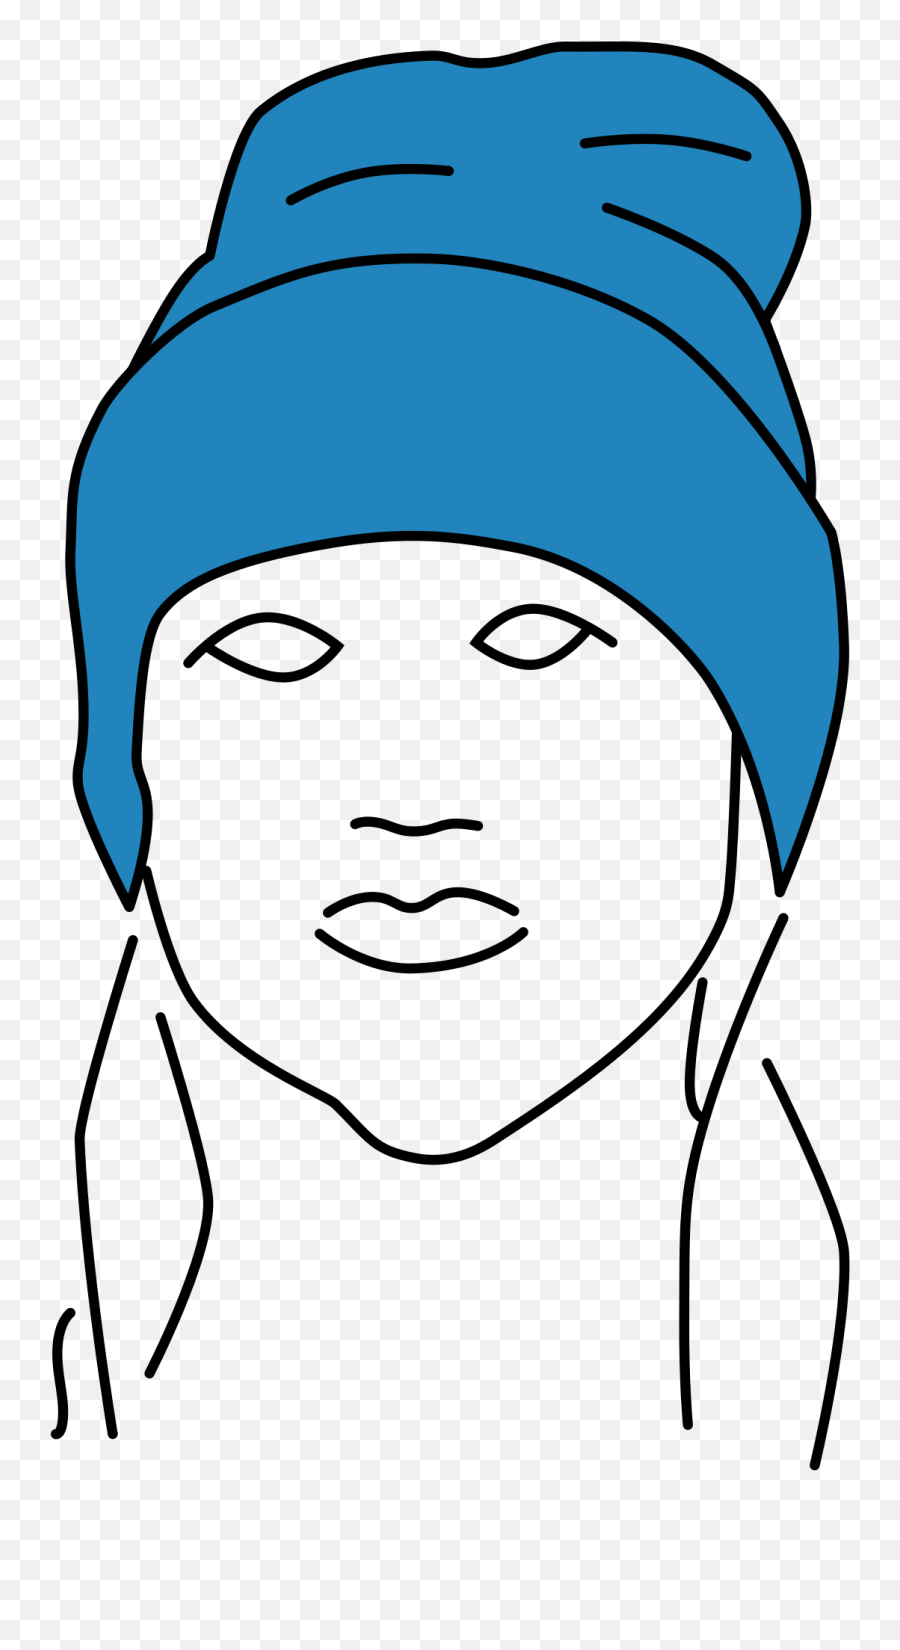 Filebeaniesvg - Wikimedia Commons Draw A Beanie Front View Png,Beanie Png